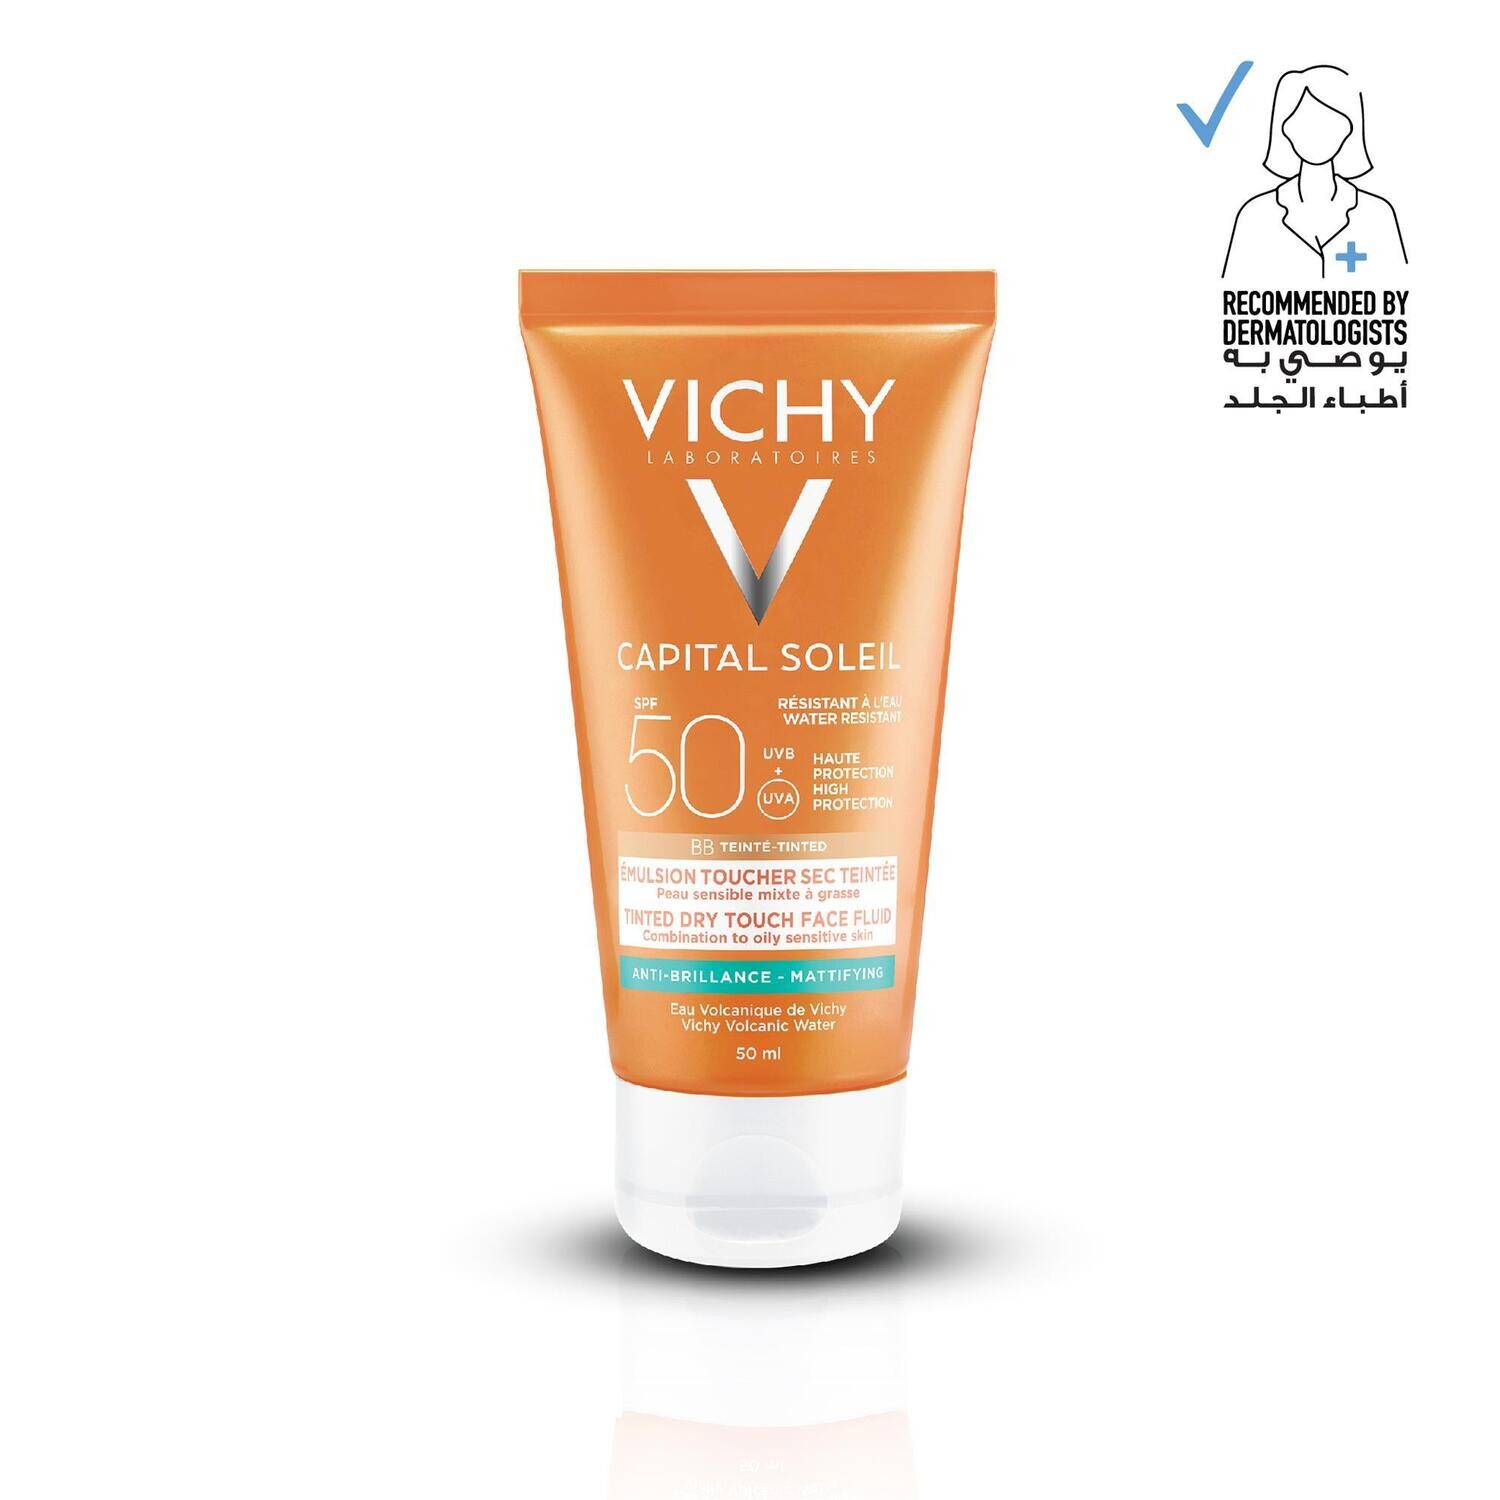 VICHY - Capital Soleil BB Tinted Dry Touch Face Fluid SPF50